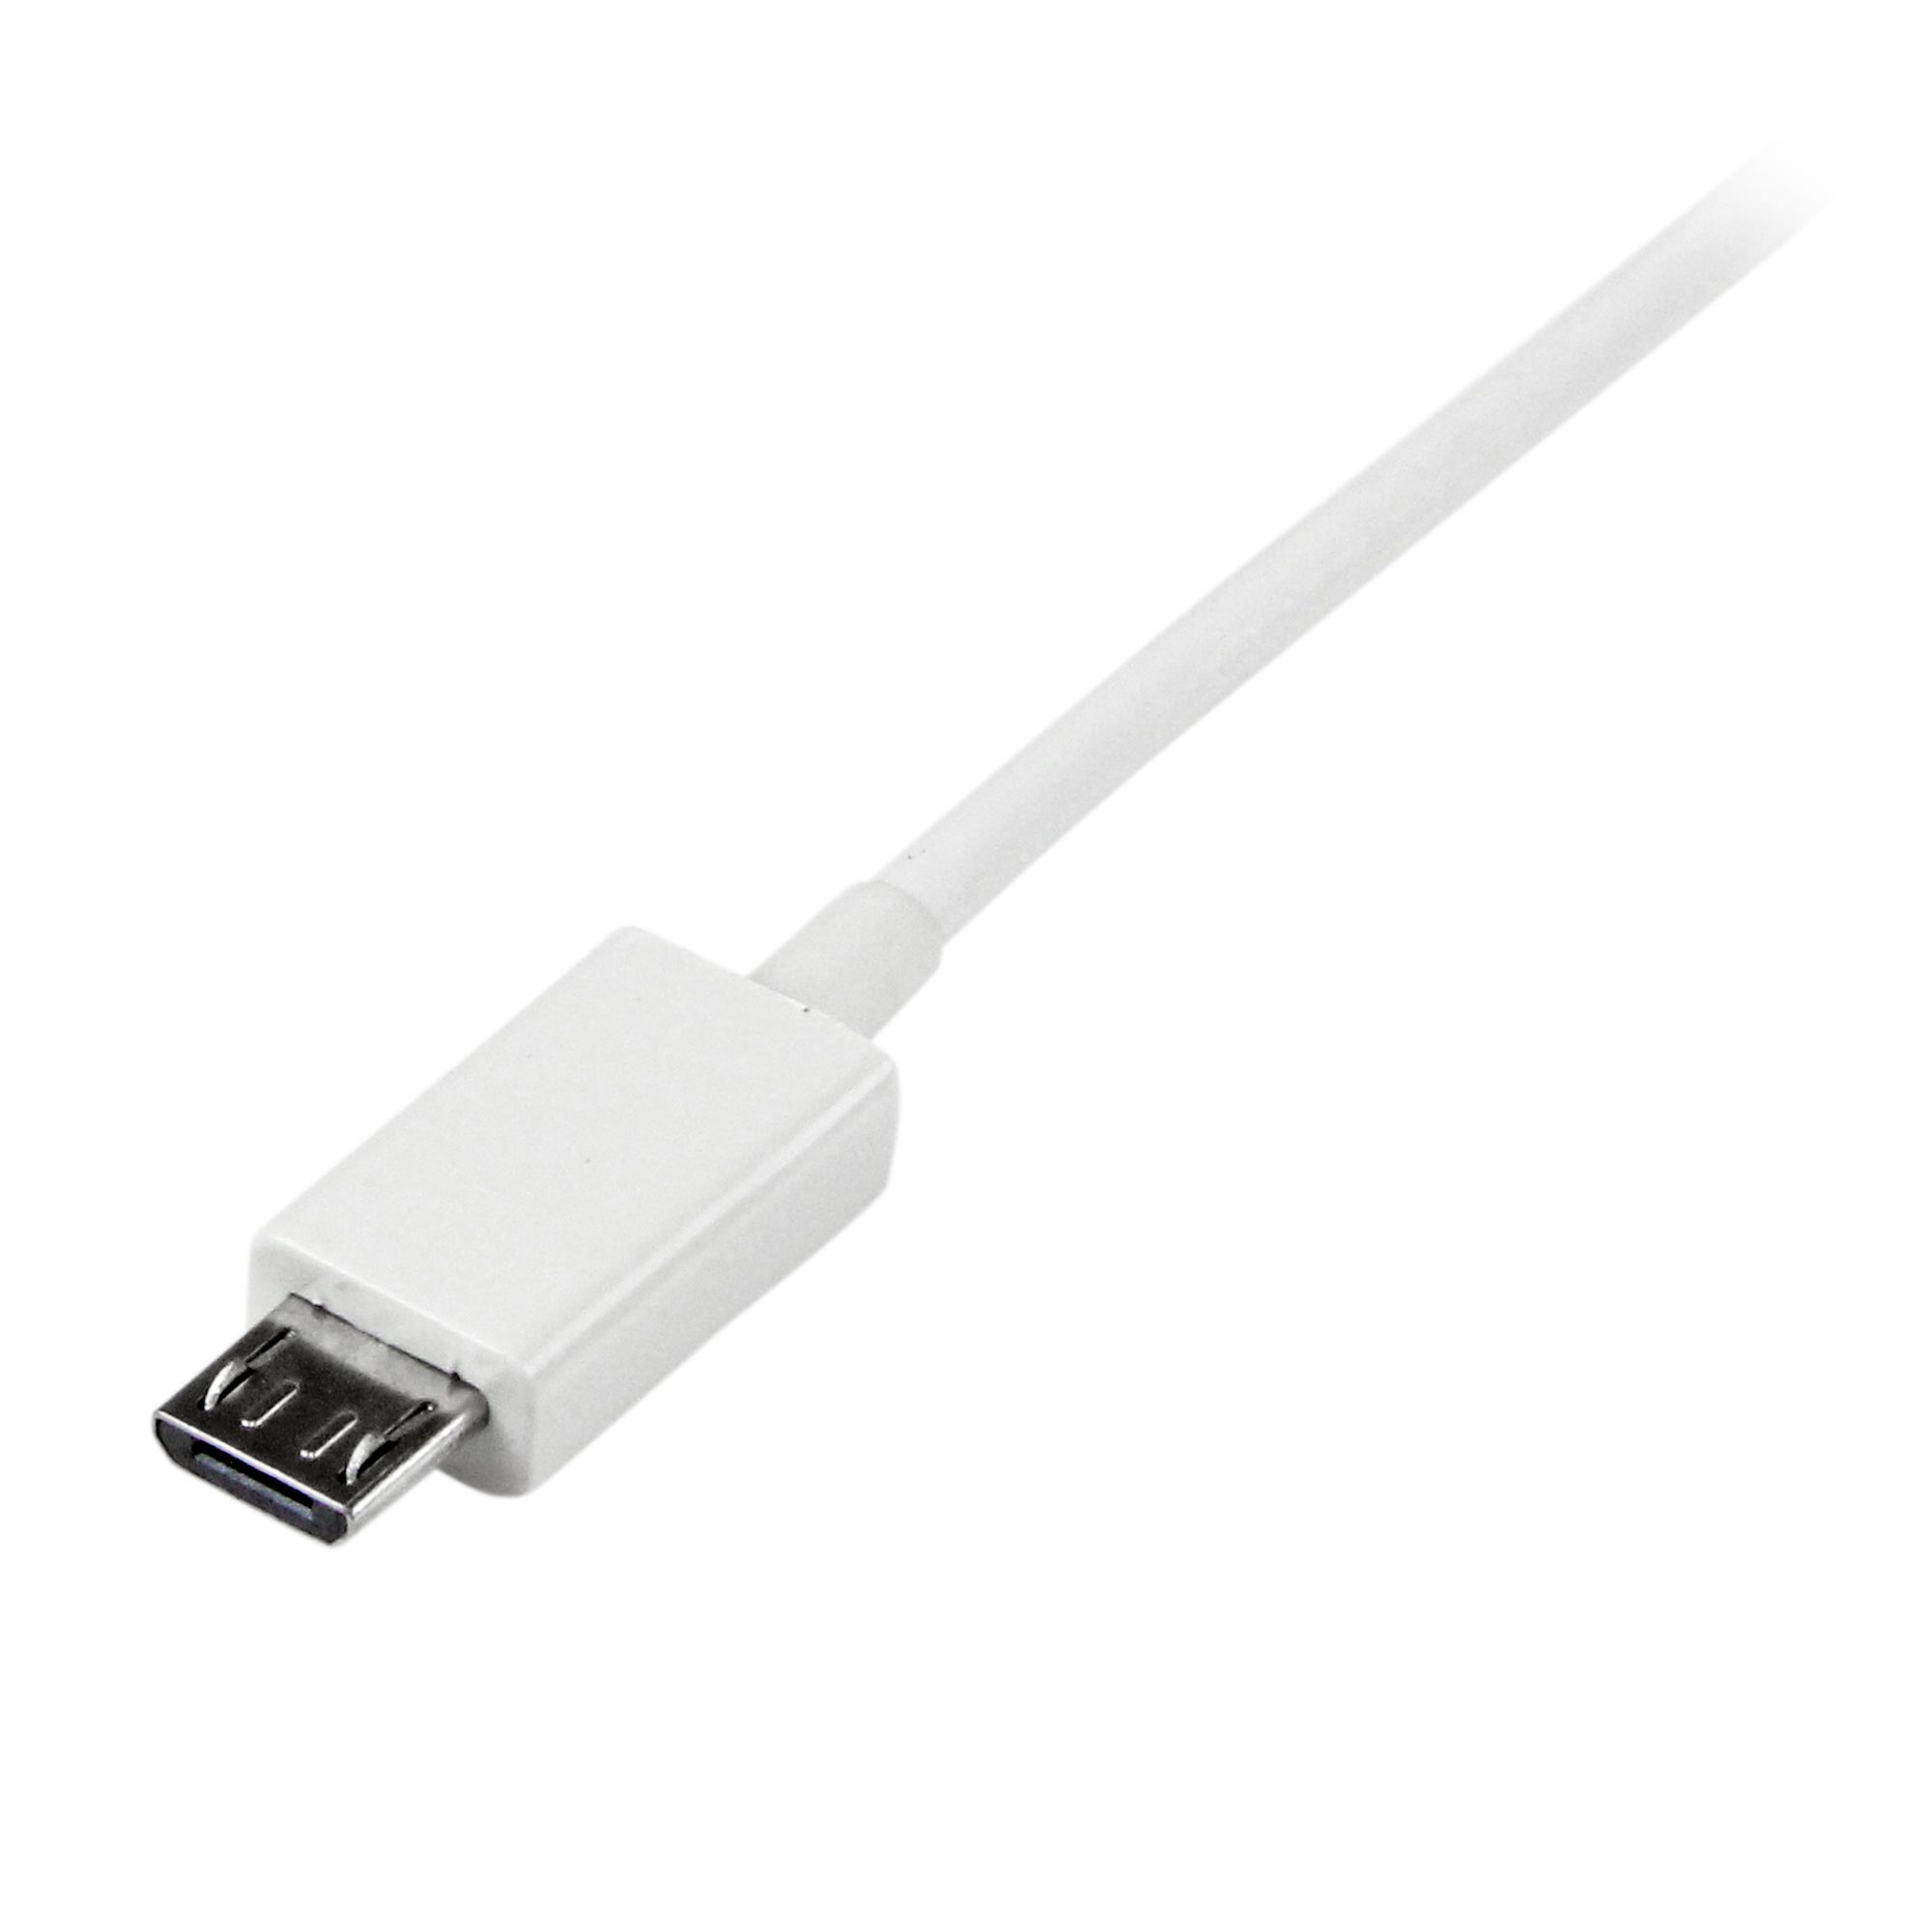 0.5m White Micro USB Cable - A to Micro B